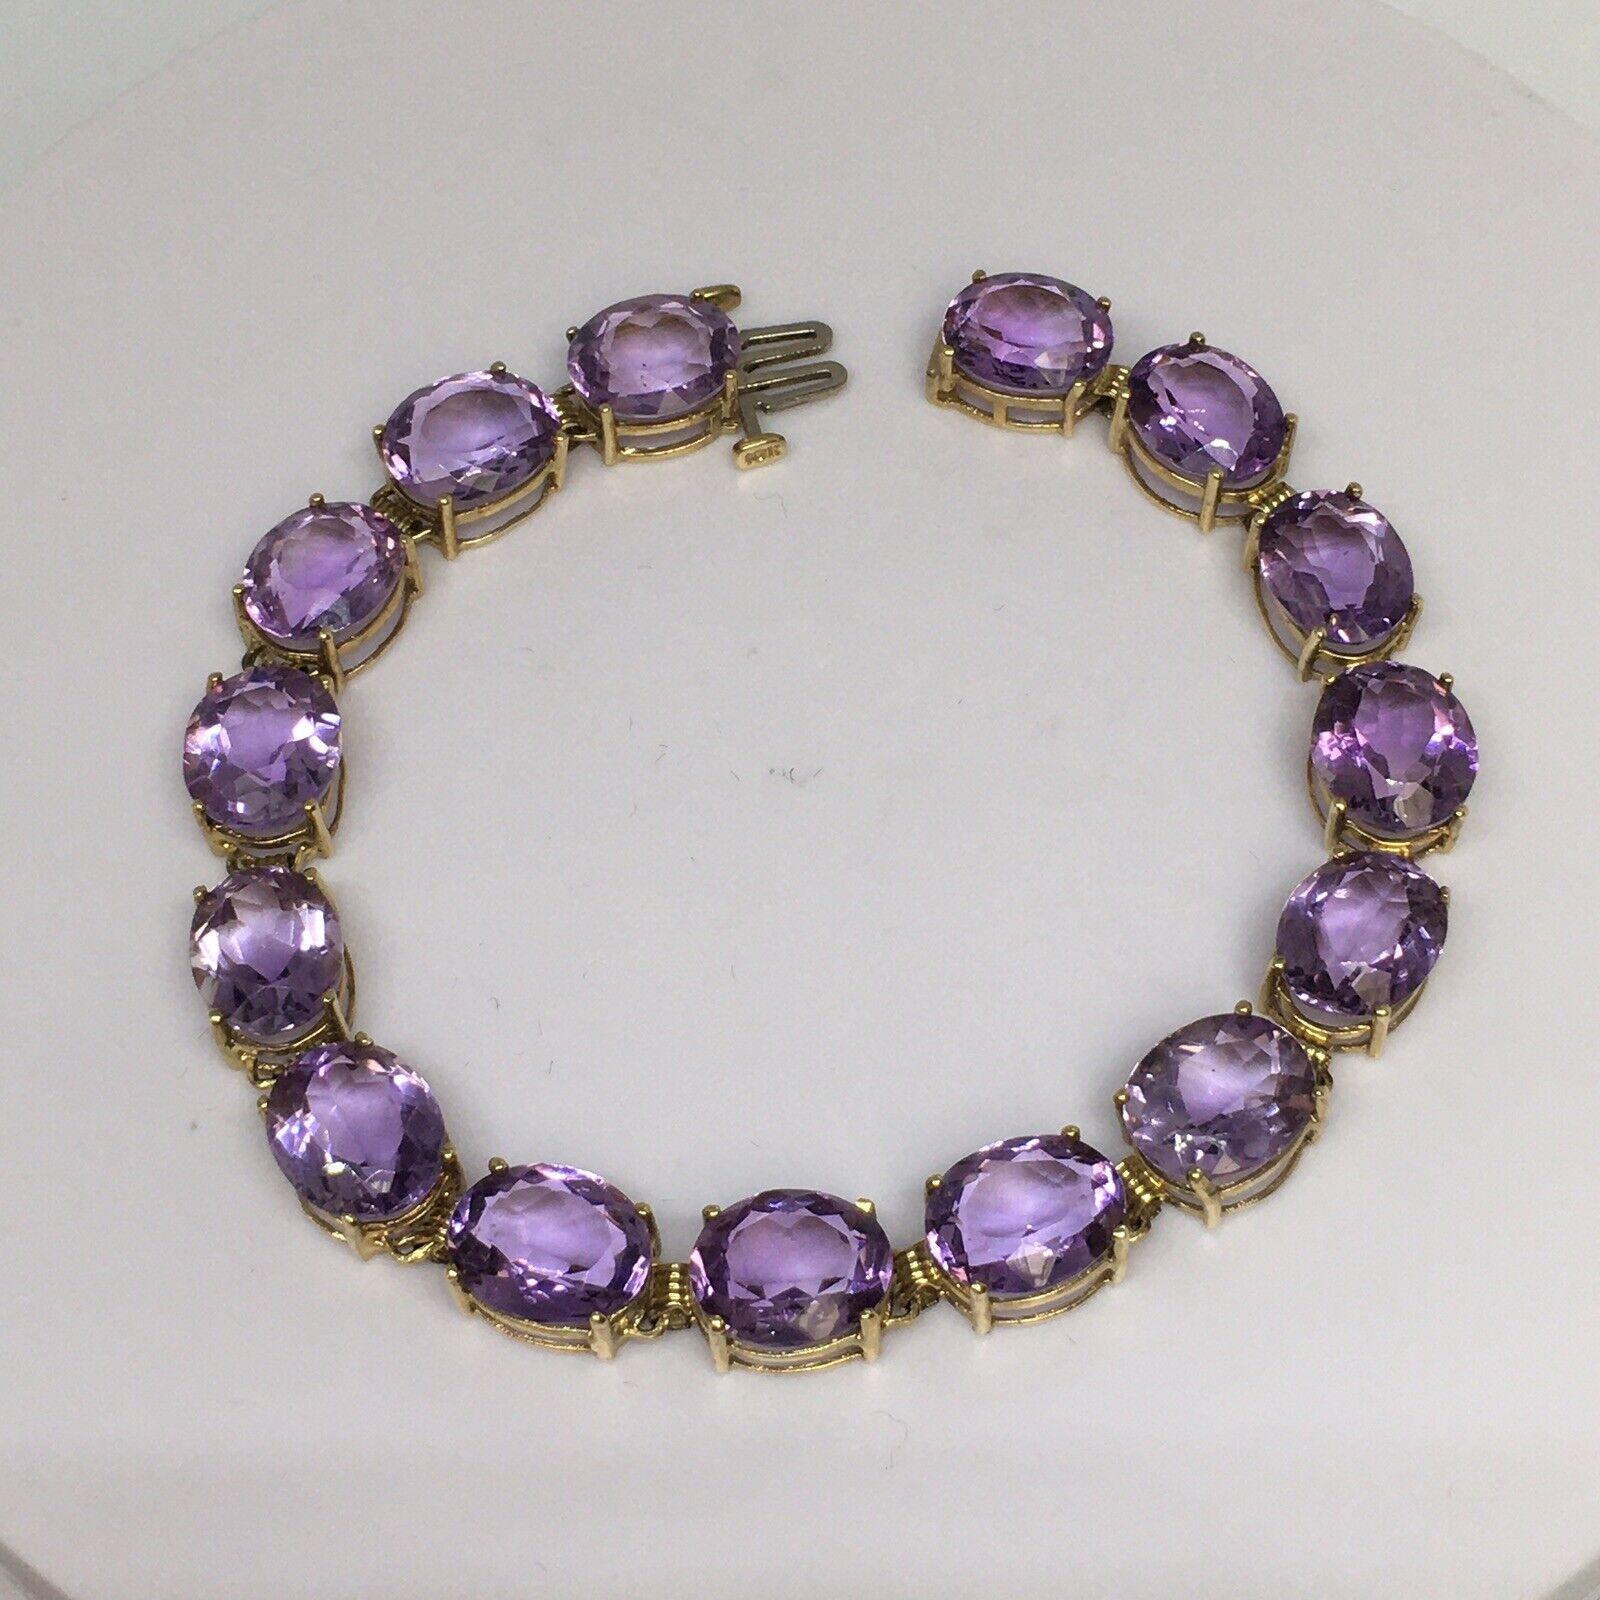 10K gold 11 mm by 9 mm 38 Ct Oval Natural Amethyst Tennis Bracelet Women 8 inch

15 stones, 11 mm by 9 mm, oval amethysts approximately 38 Carats
8 inch long
Weighting 19.4 gram
All in good condition, no damage, no evidence of repairs, see pictures